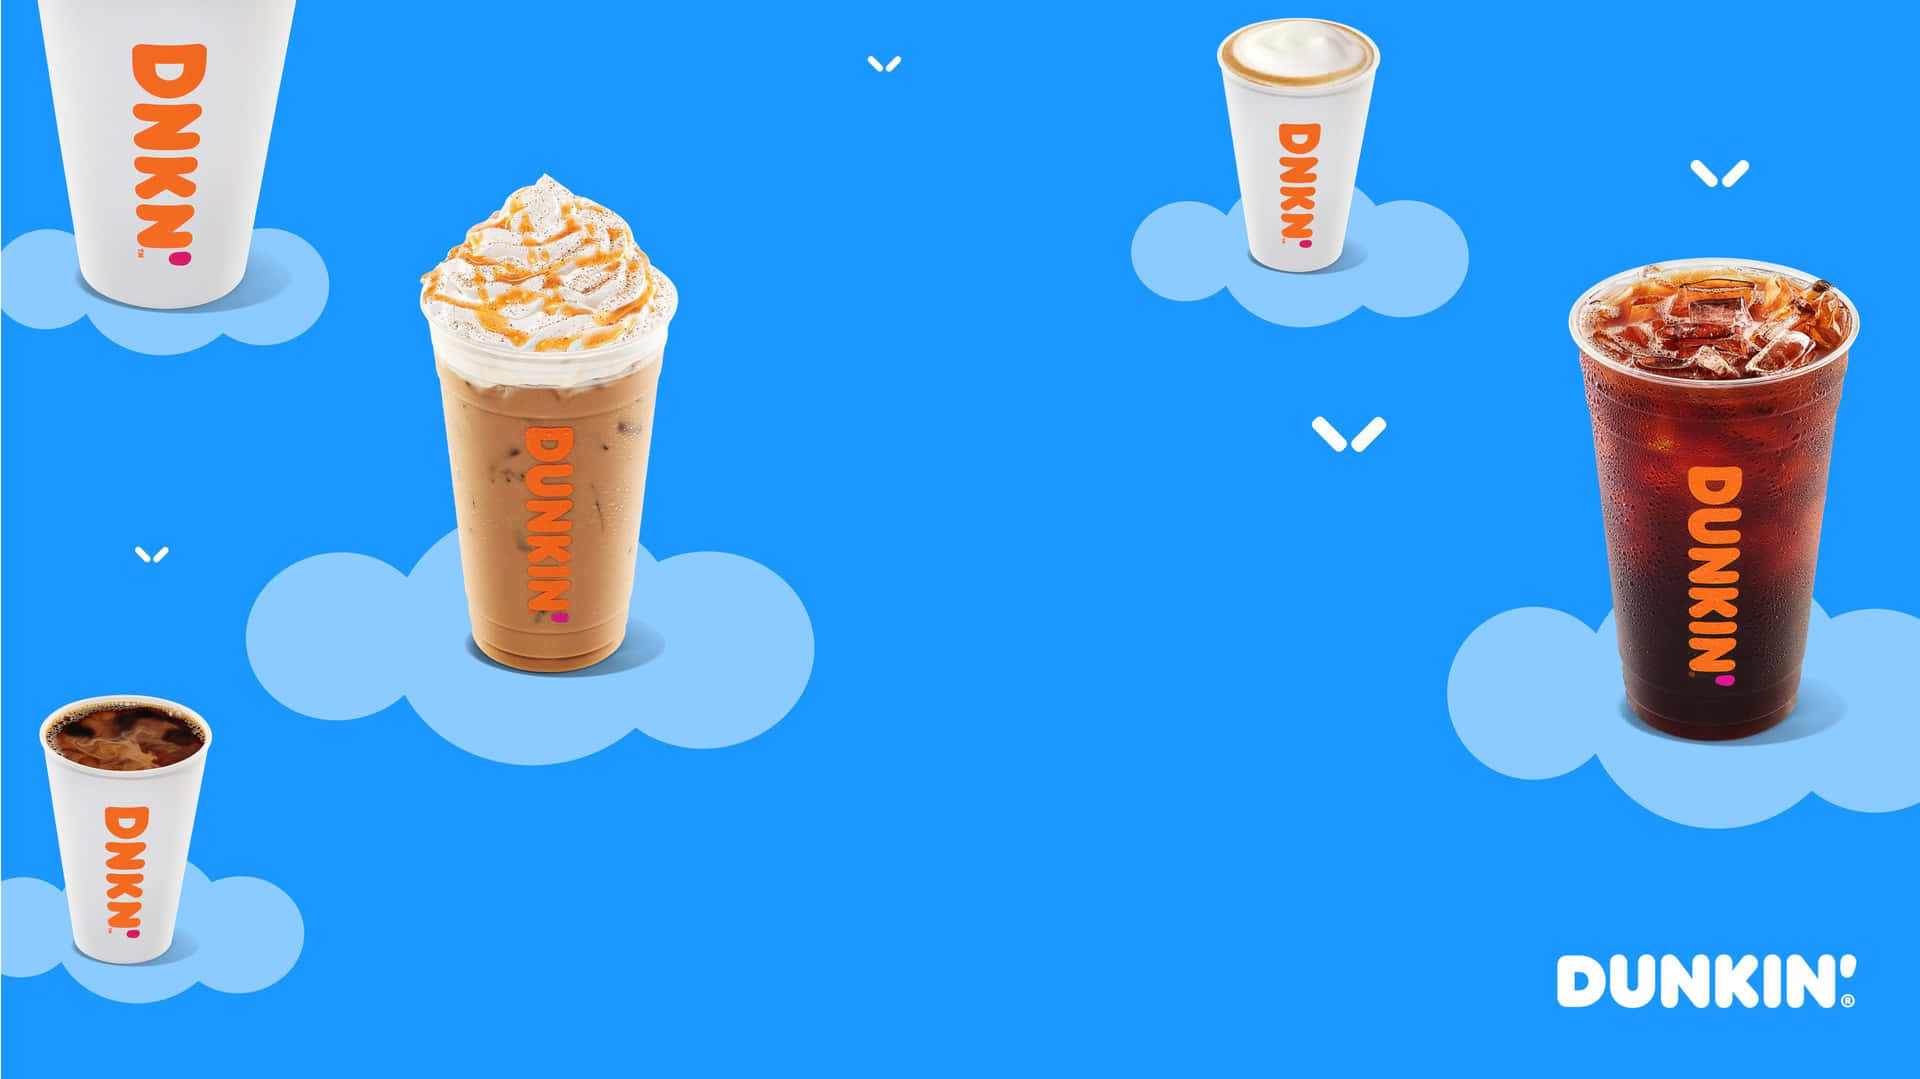 Enjoy a delicious treat at Dunkin Donuts!